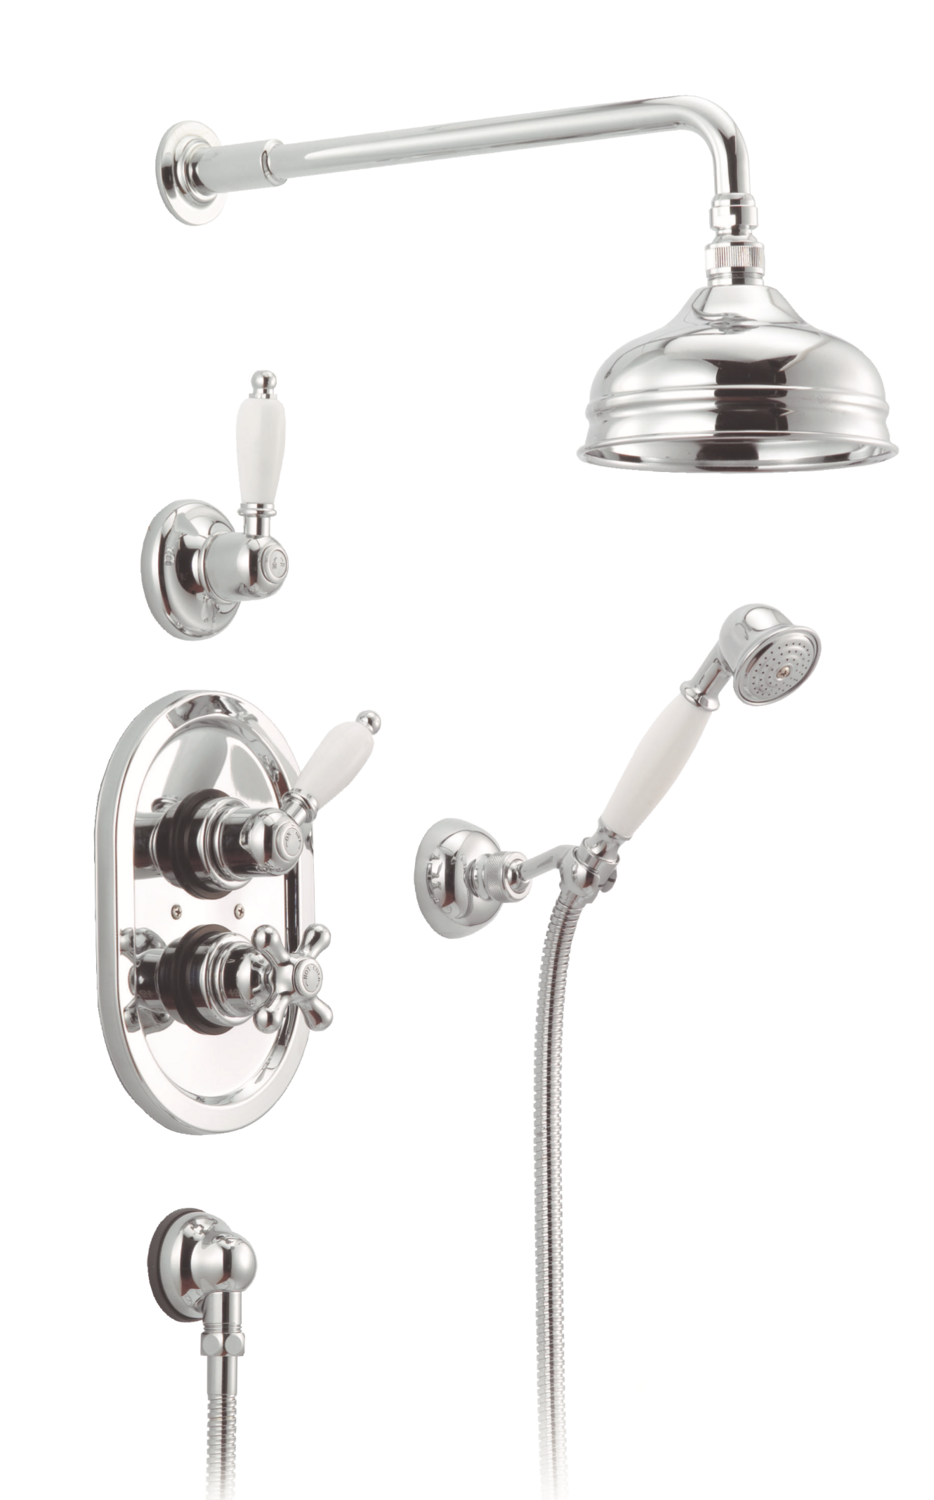 Venice built-in thermostatic shower set